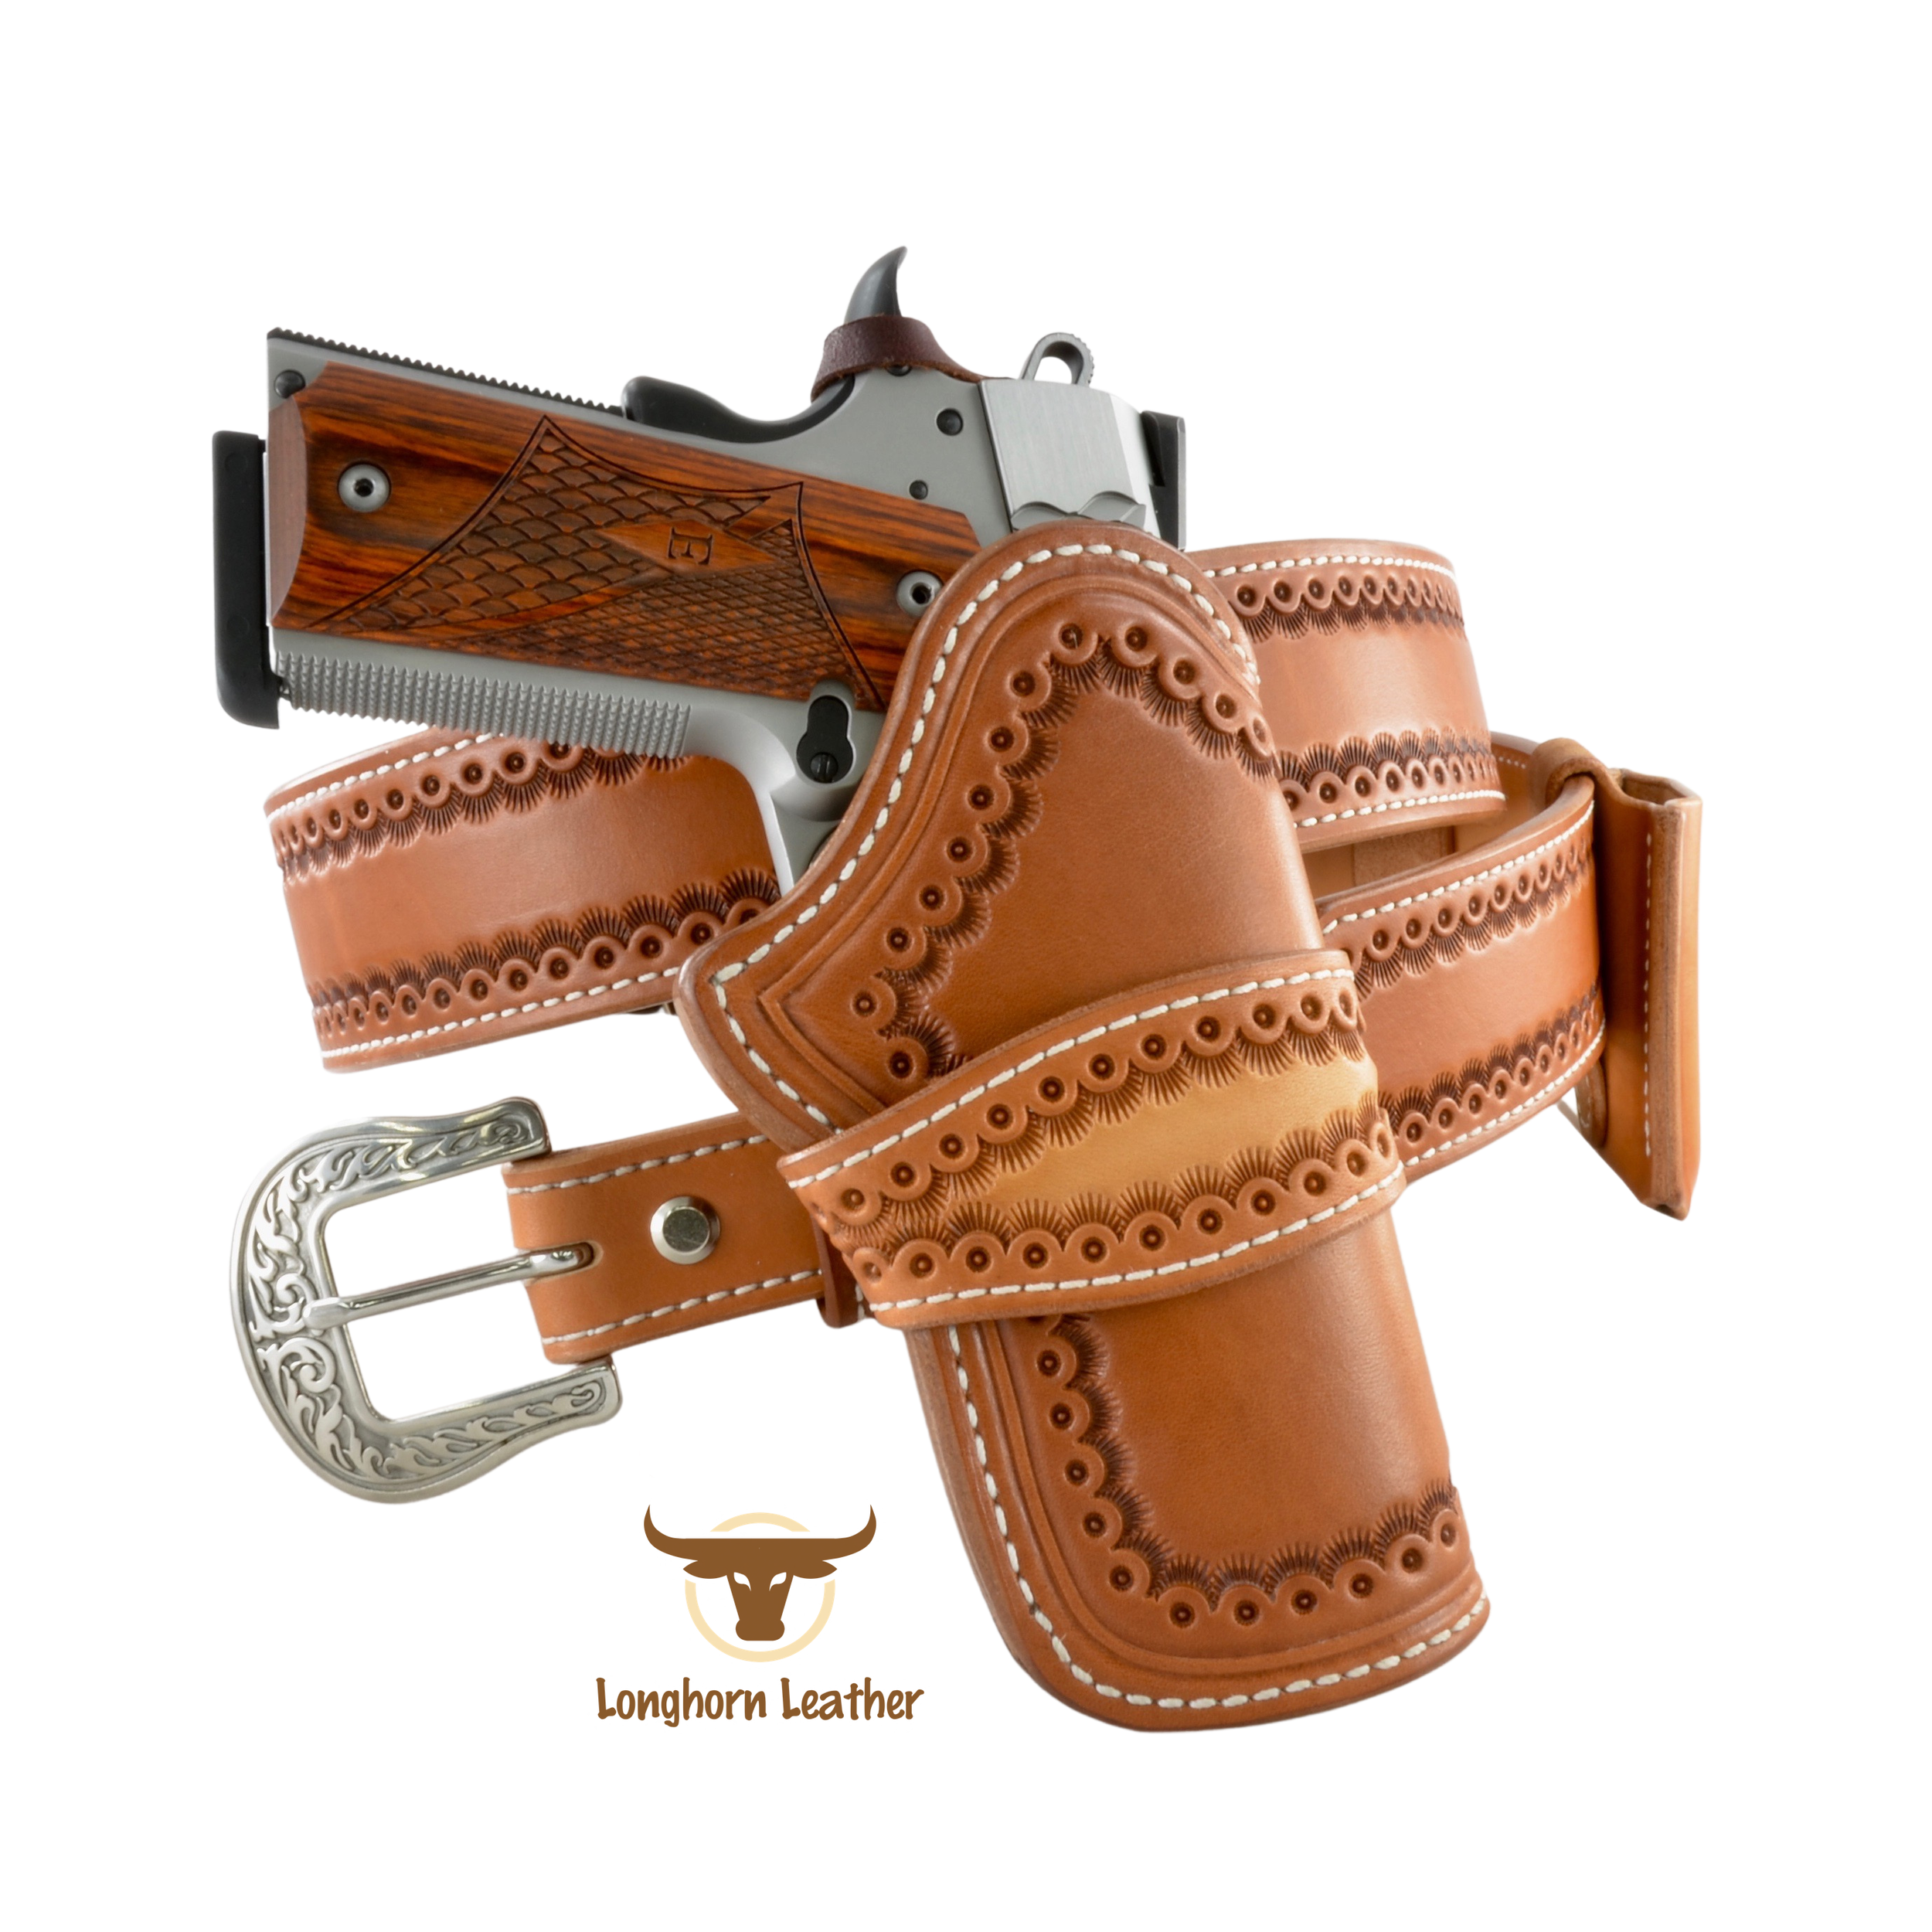 Custom leather 1911 holster, gun belt and magazine carrier featuring the "Cimarron" design.  Individually handcrafted at Longhorn Leather AZ.